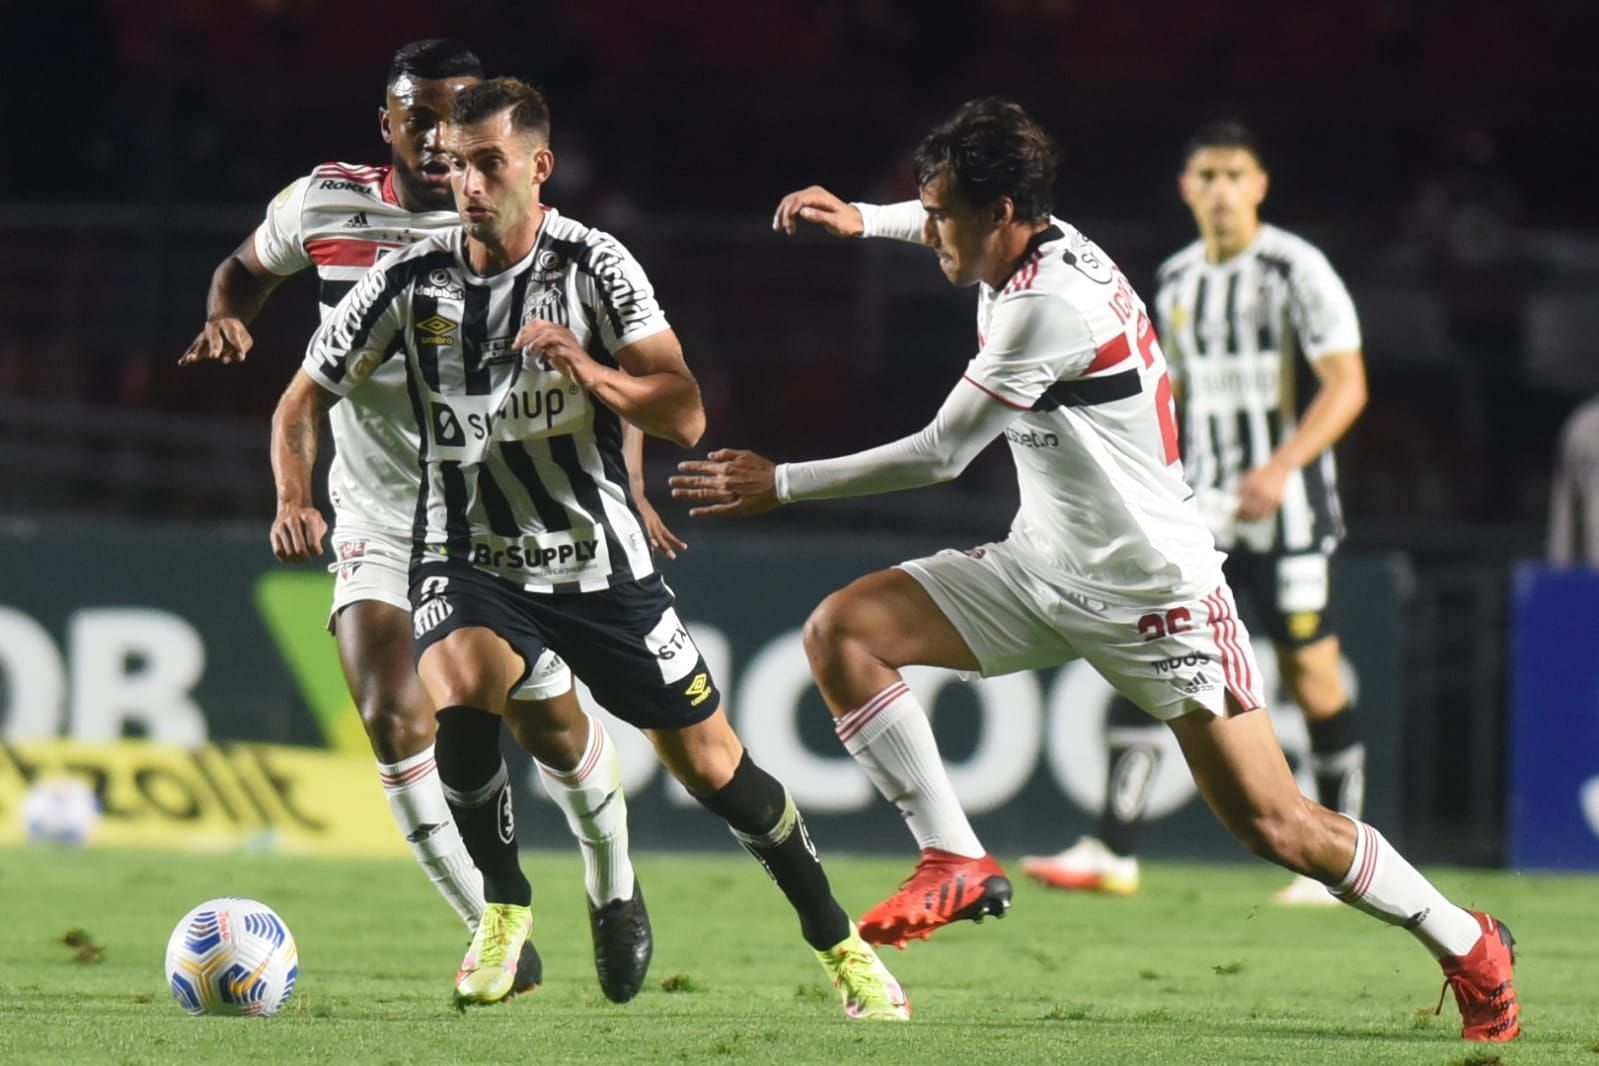 Sao Paulo and Santos will lock horns in the Brazilian Serie A on Sunday